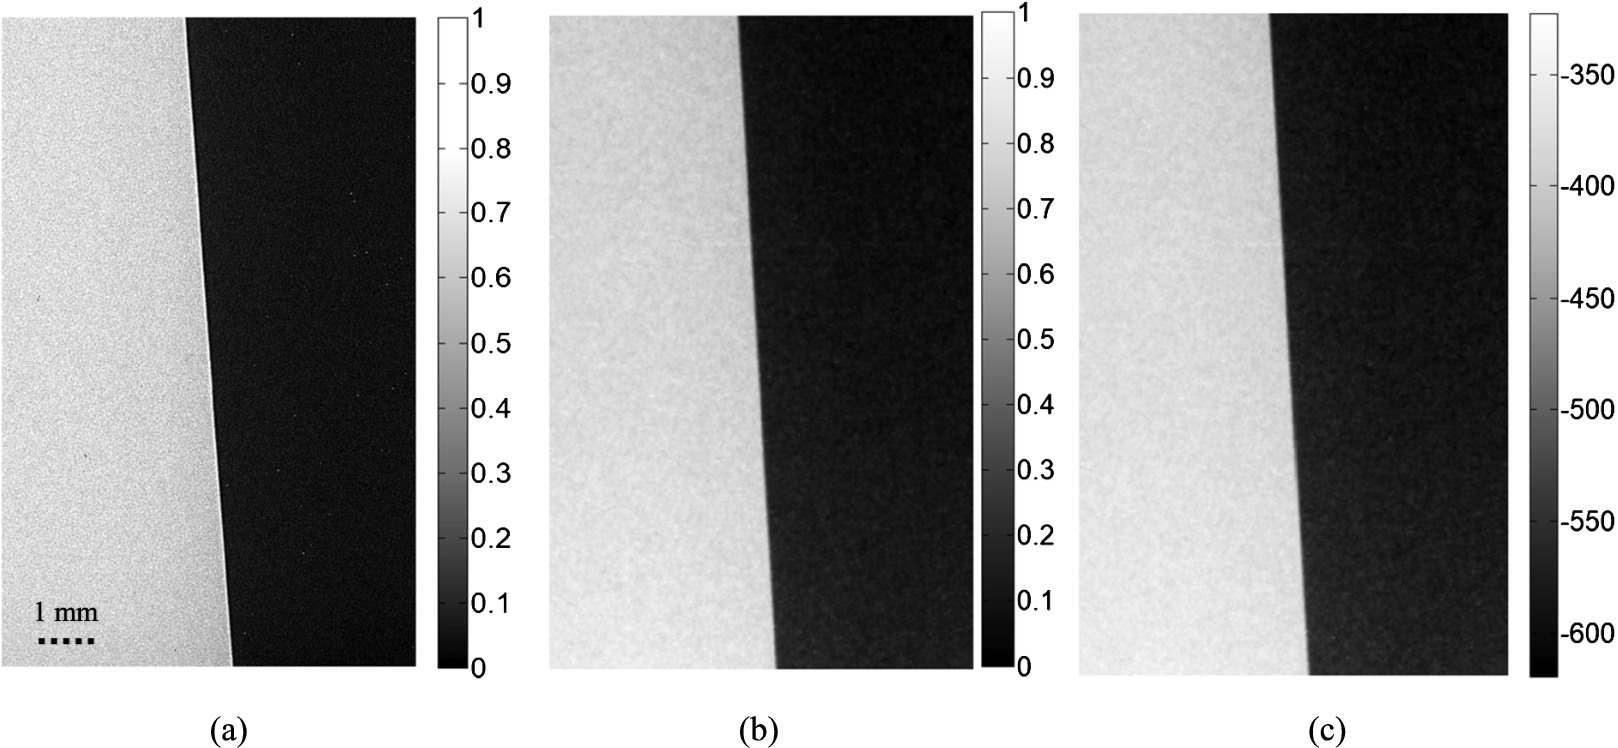 (a) phase sensitive image of the 50–50 slab-PMMA edge phantom acquired with the prototype (b) retrieved image (AKN2) processed with the PAD based method (c) phase retrieved map of the phantom with the color bar highlighting the retrieved phase values. For 2(a) and 2(b), the color bars highlight the normalized intensities in single-precision floating point numbers.